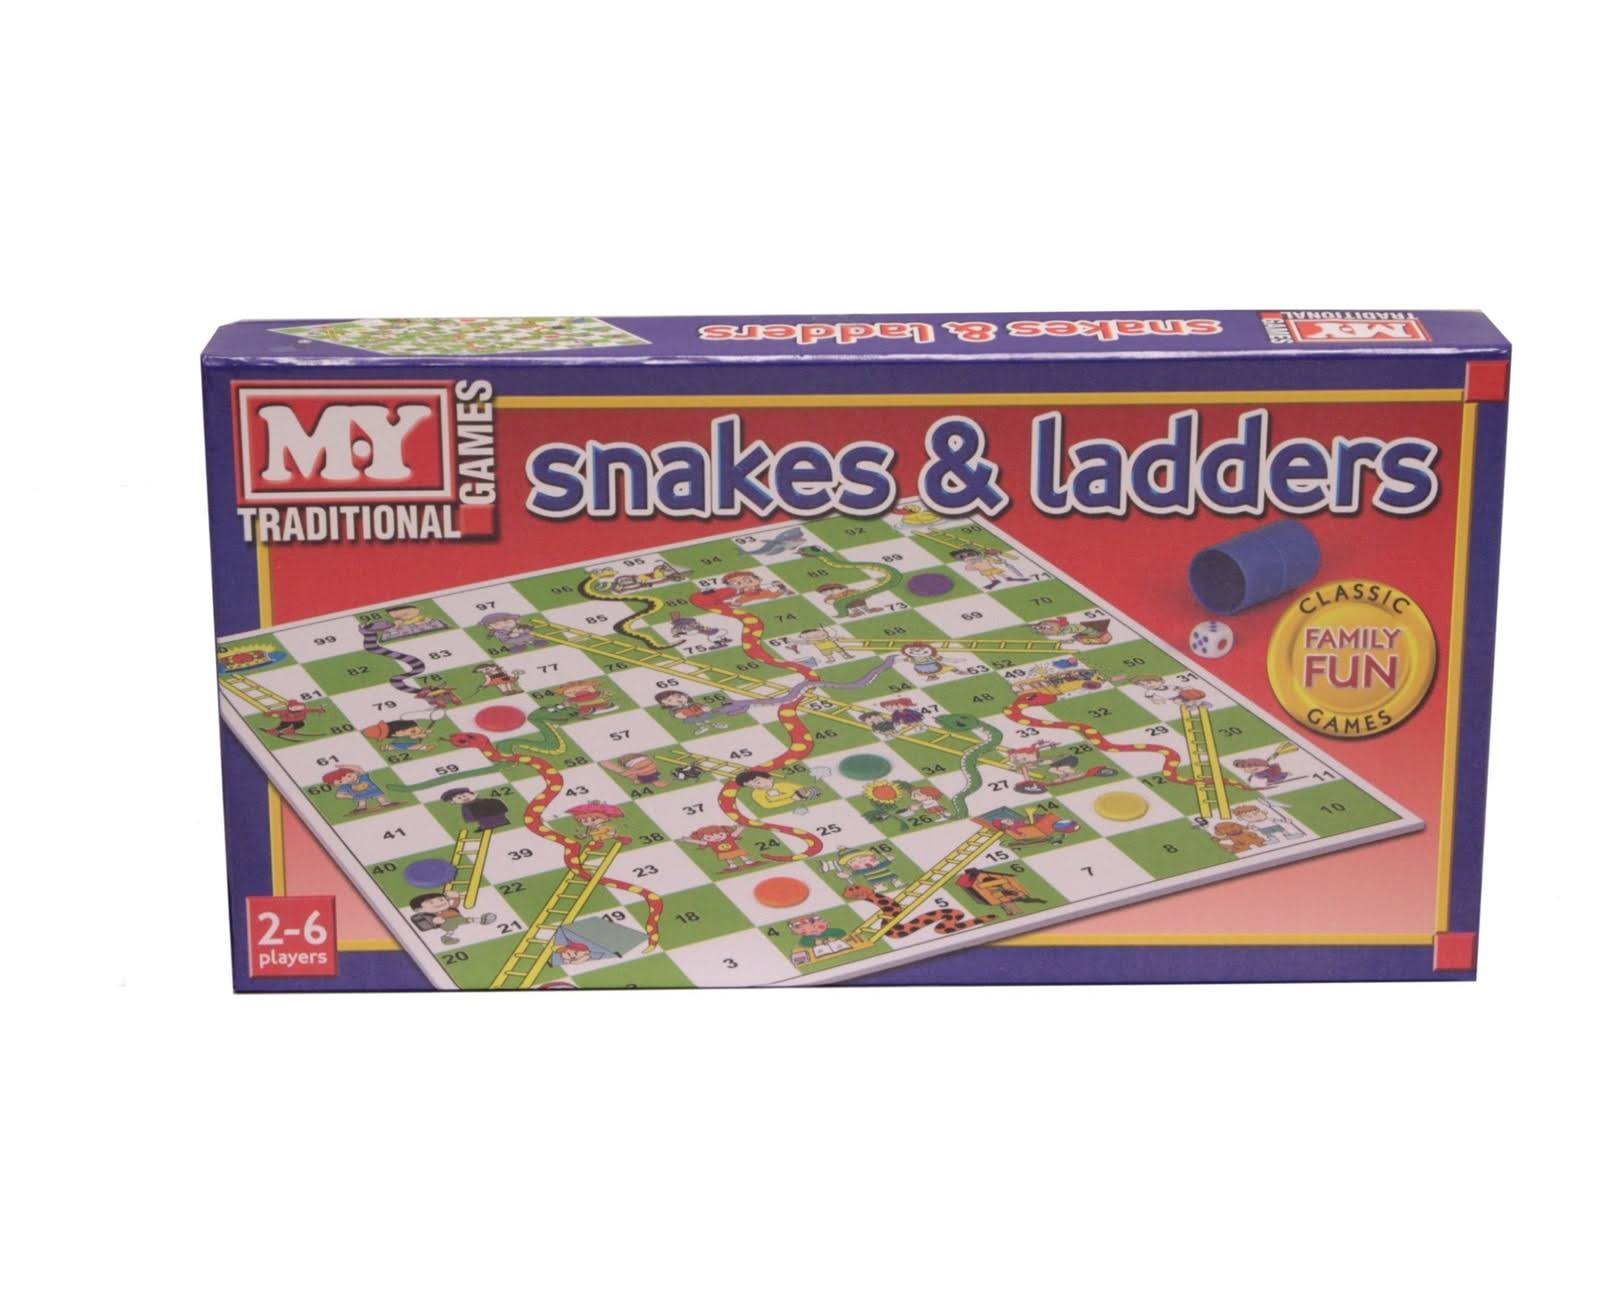 SNAKES & LADDERS TY57 FUN TRADITIONAL FAMILY CLASSIC FUN KIDS BOARD GAME  KIDS 